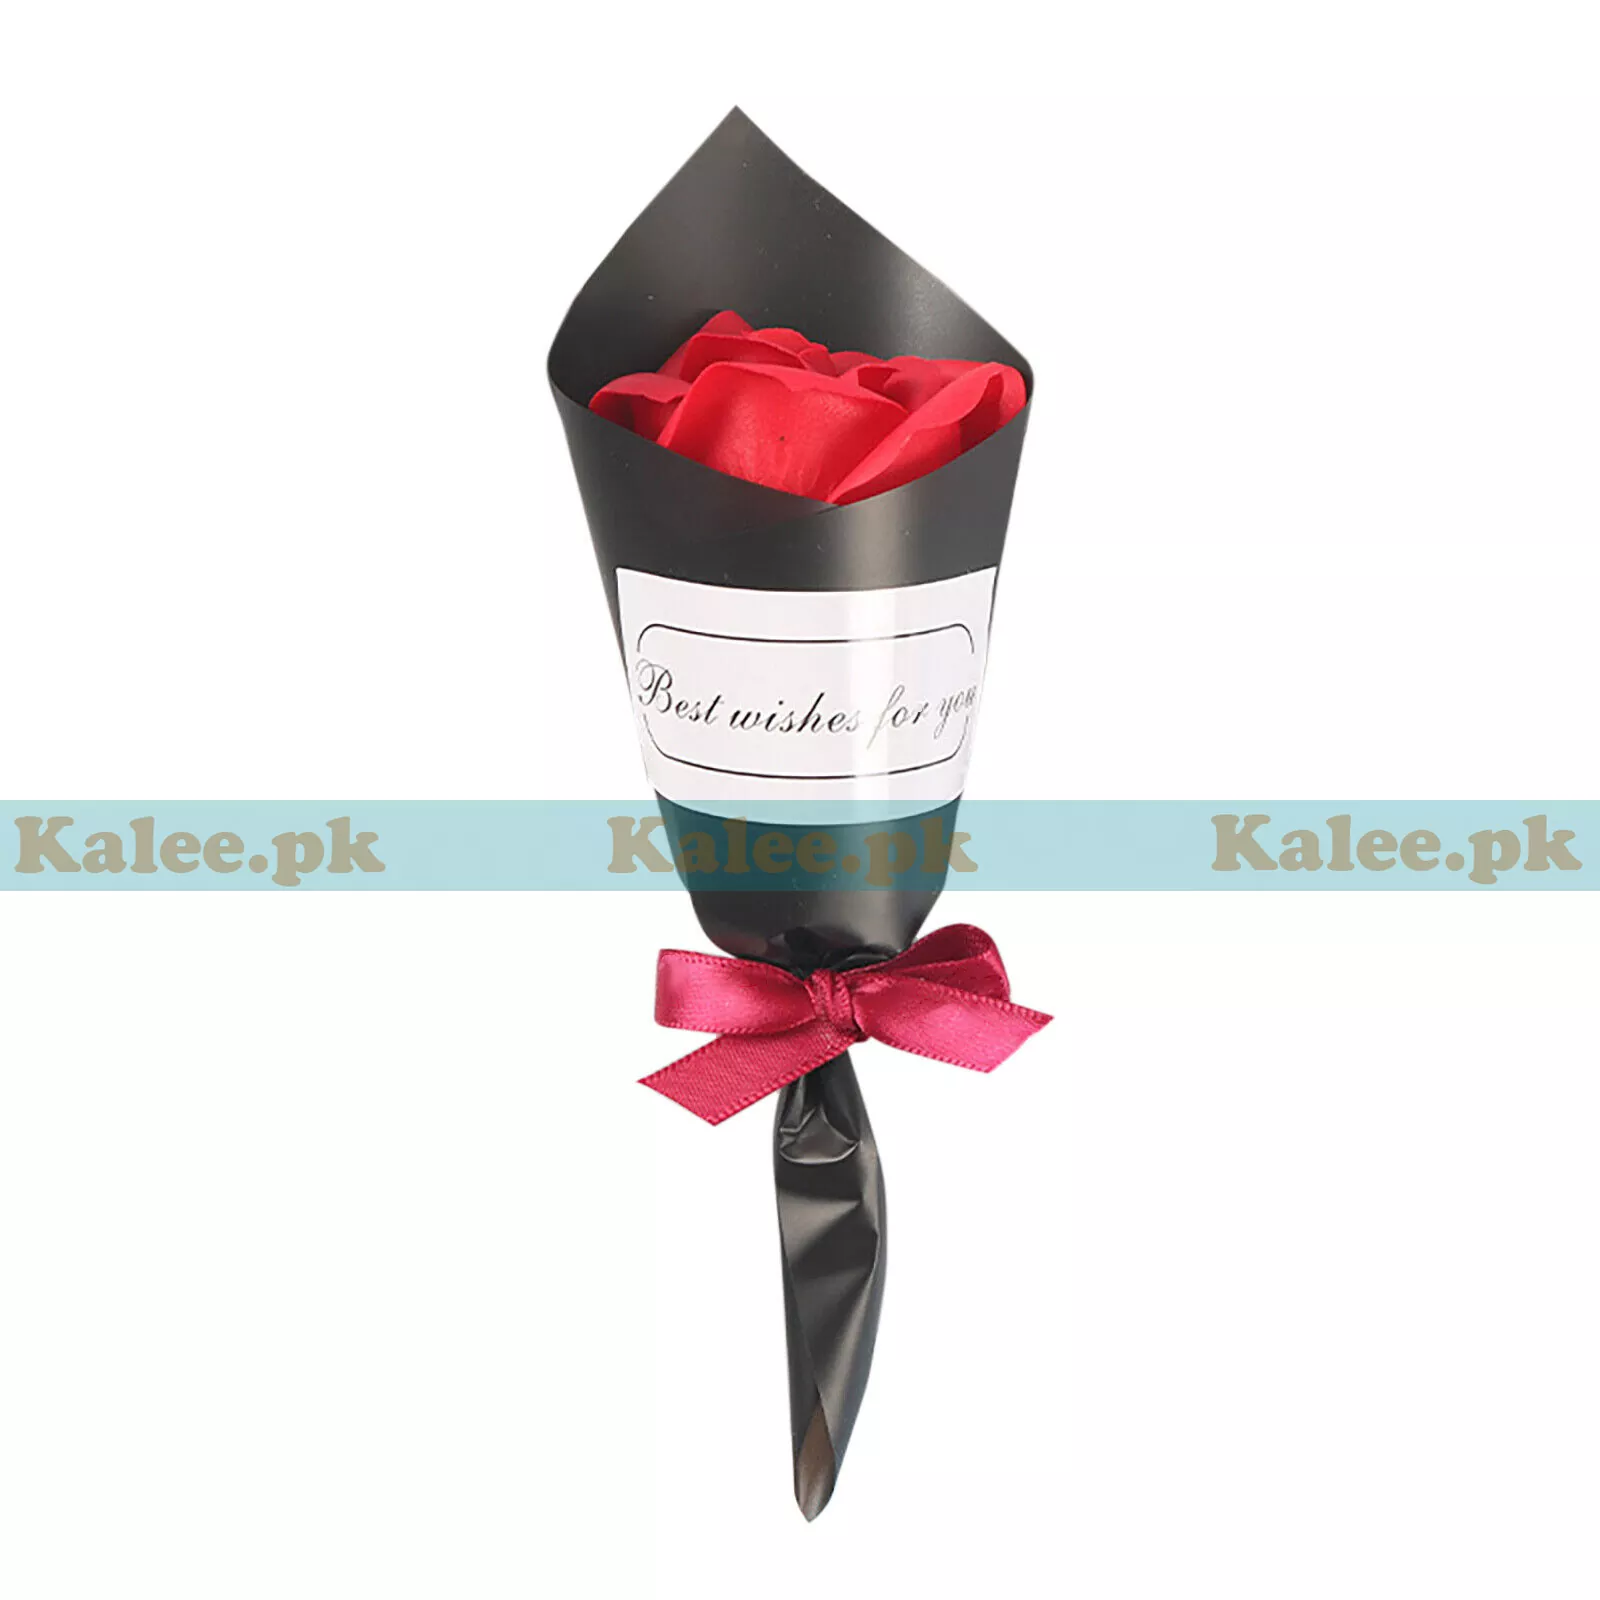 A single red rose elegantly wrapped in black paper.